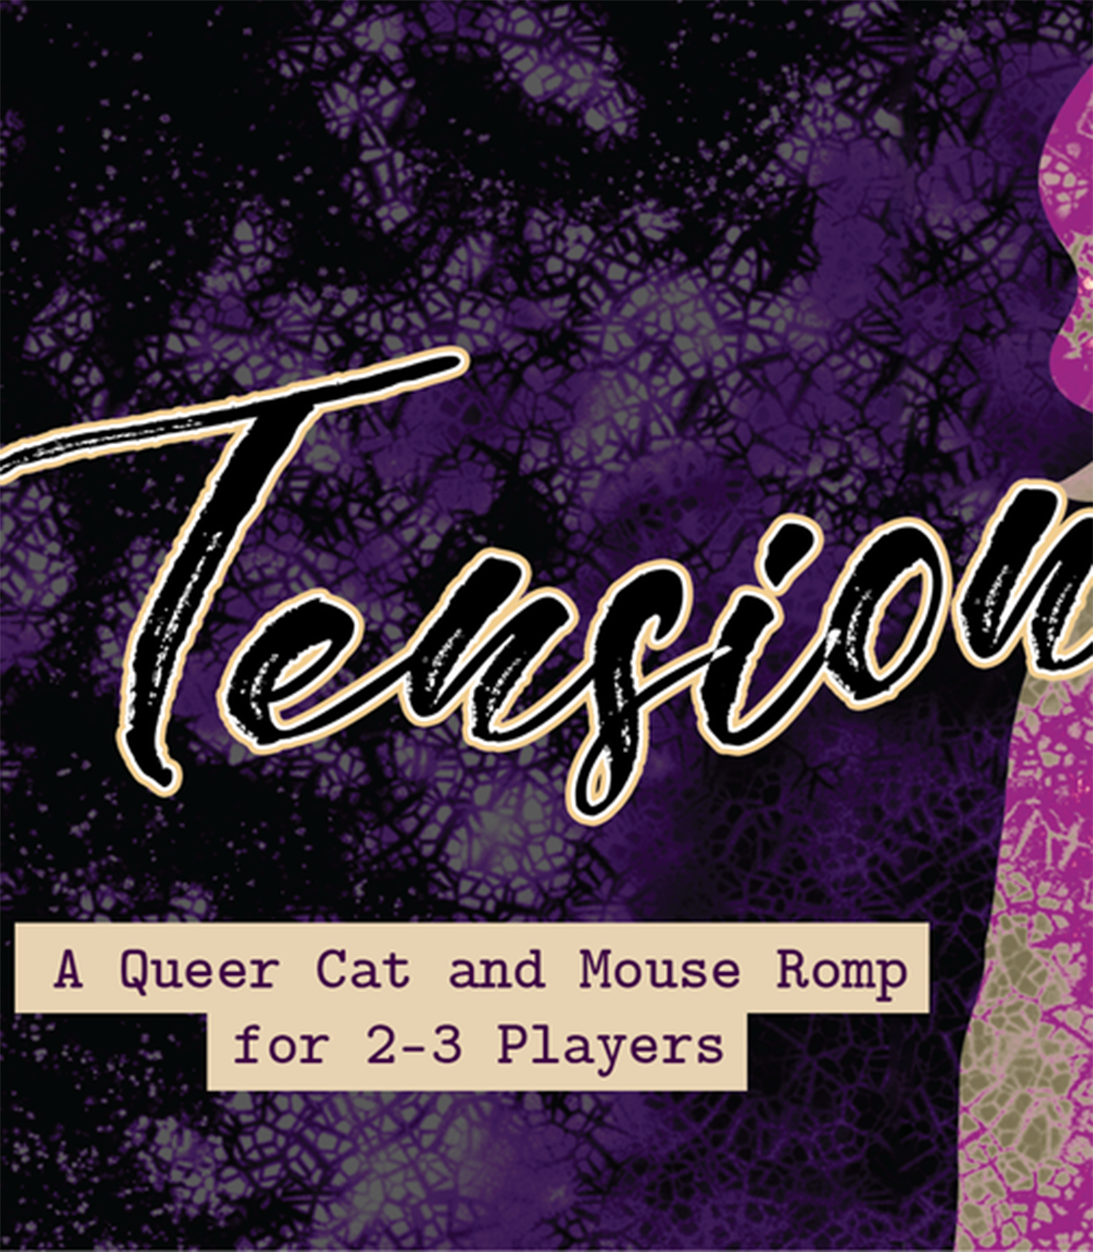 Tension: A queer Cat and Mouse Romp for 2-3 Players